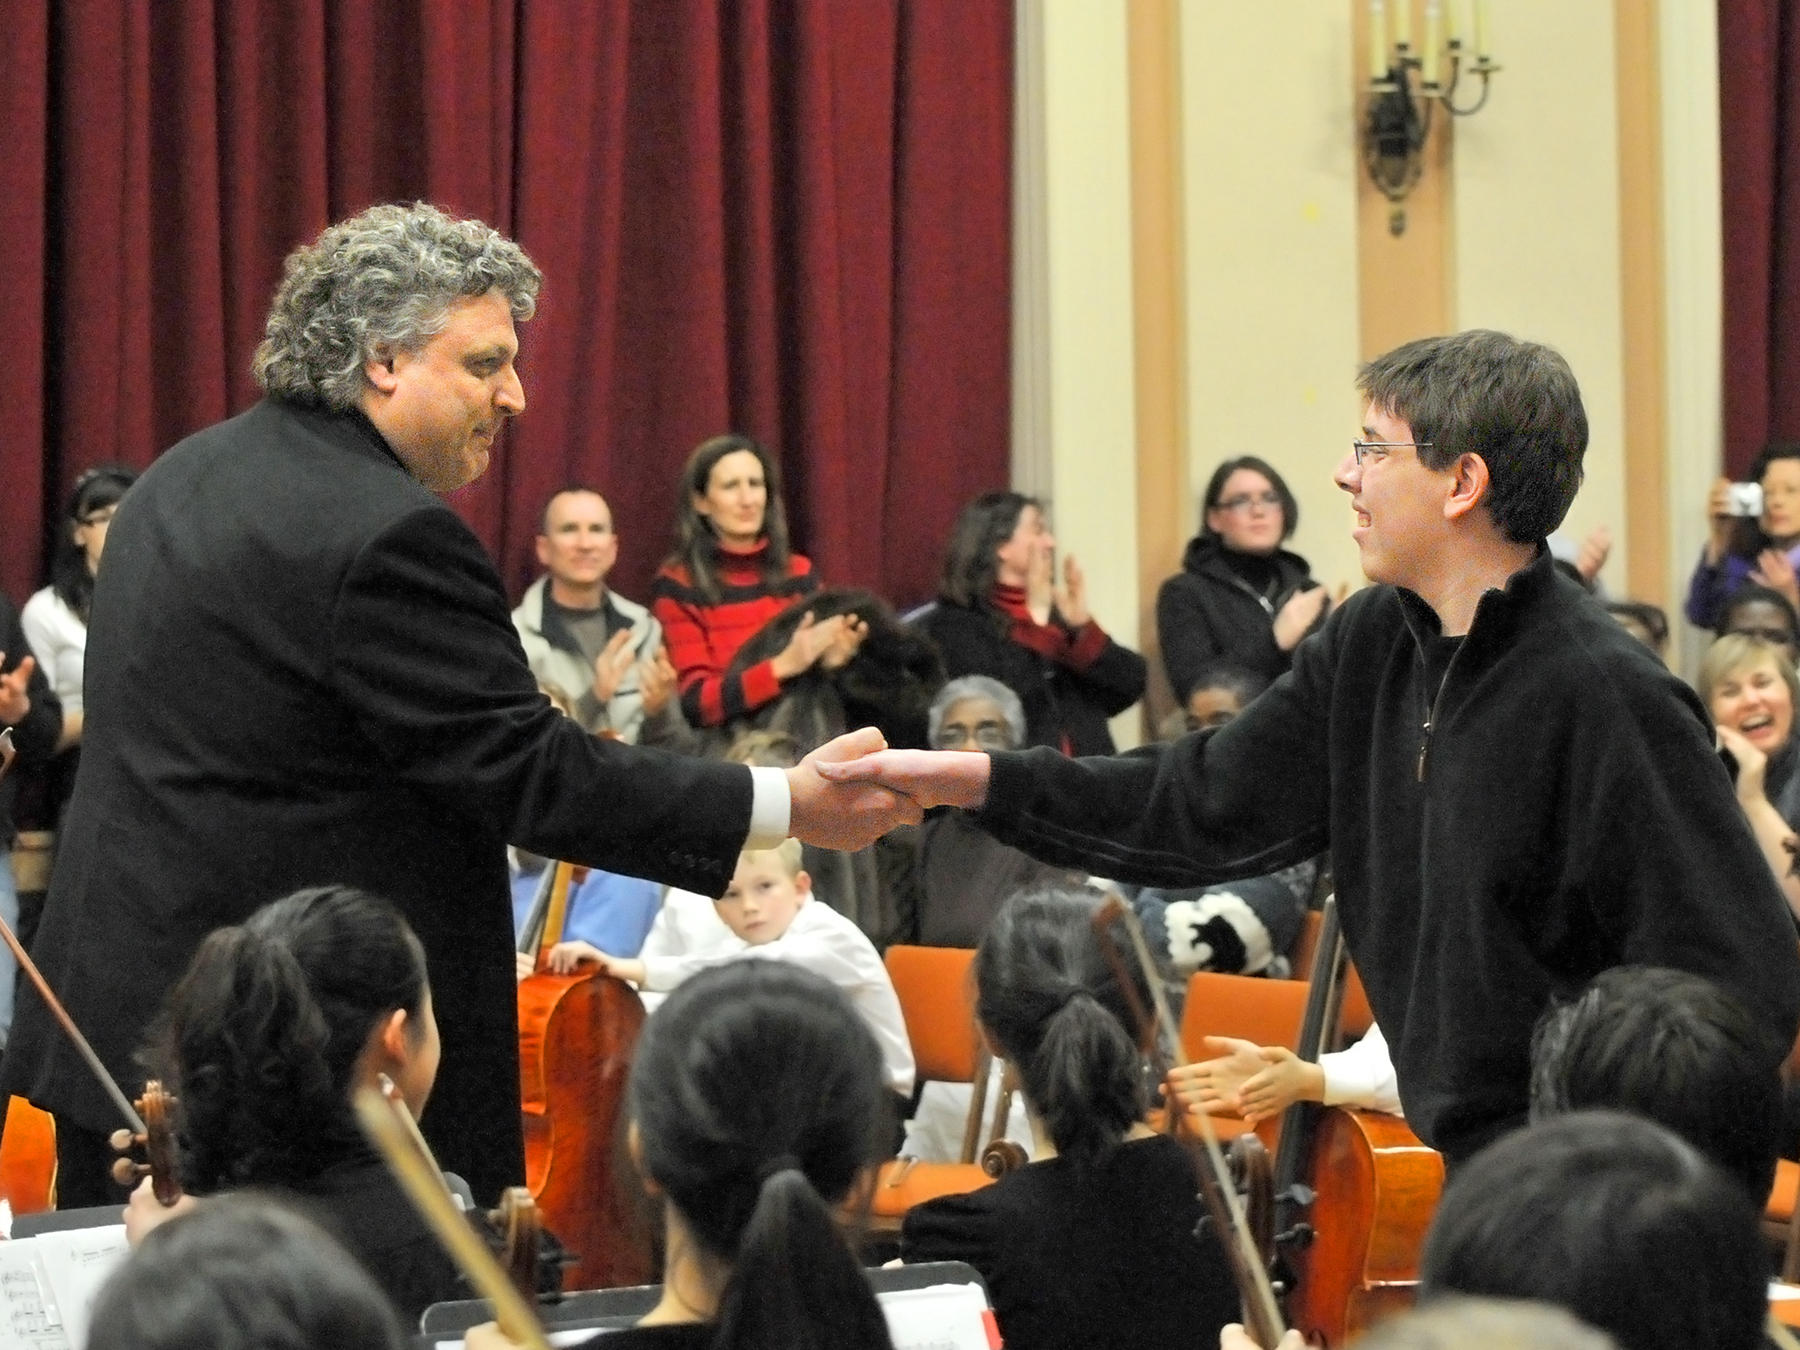 Steven Karidoyanes shakes hands with a young composer